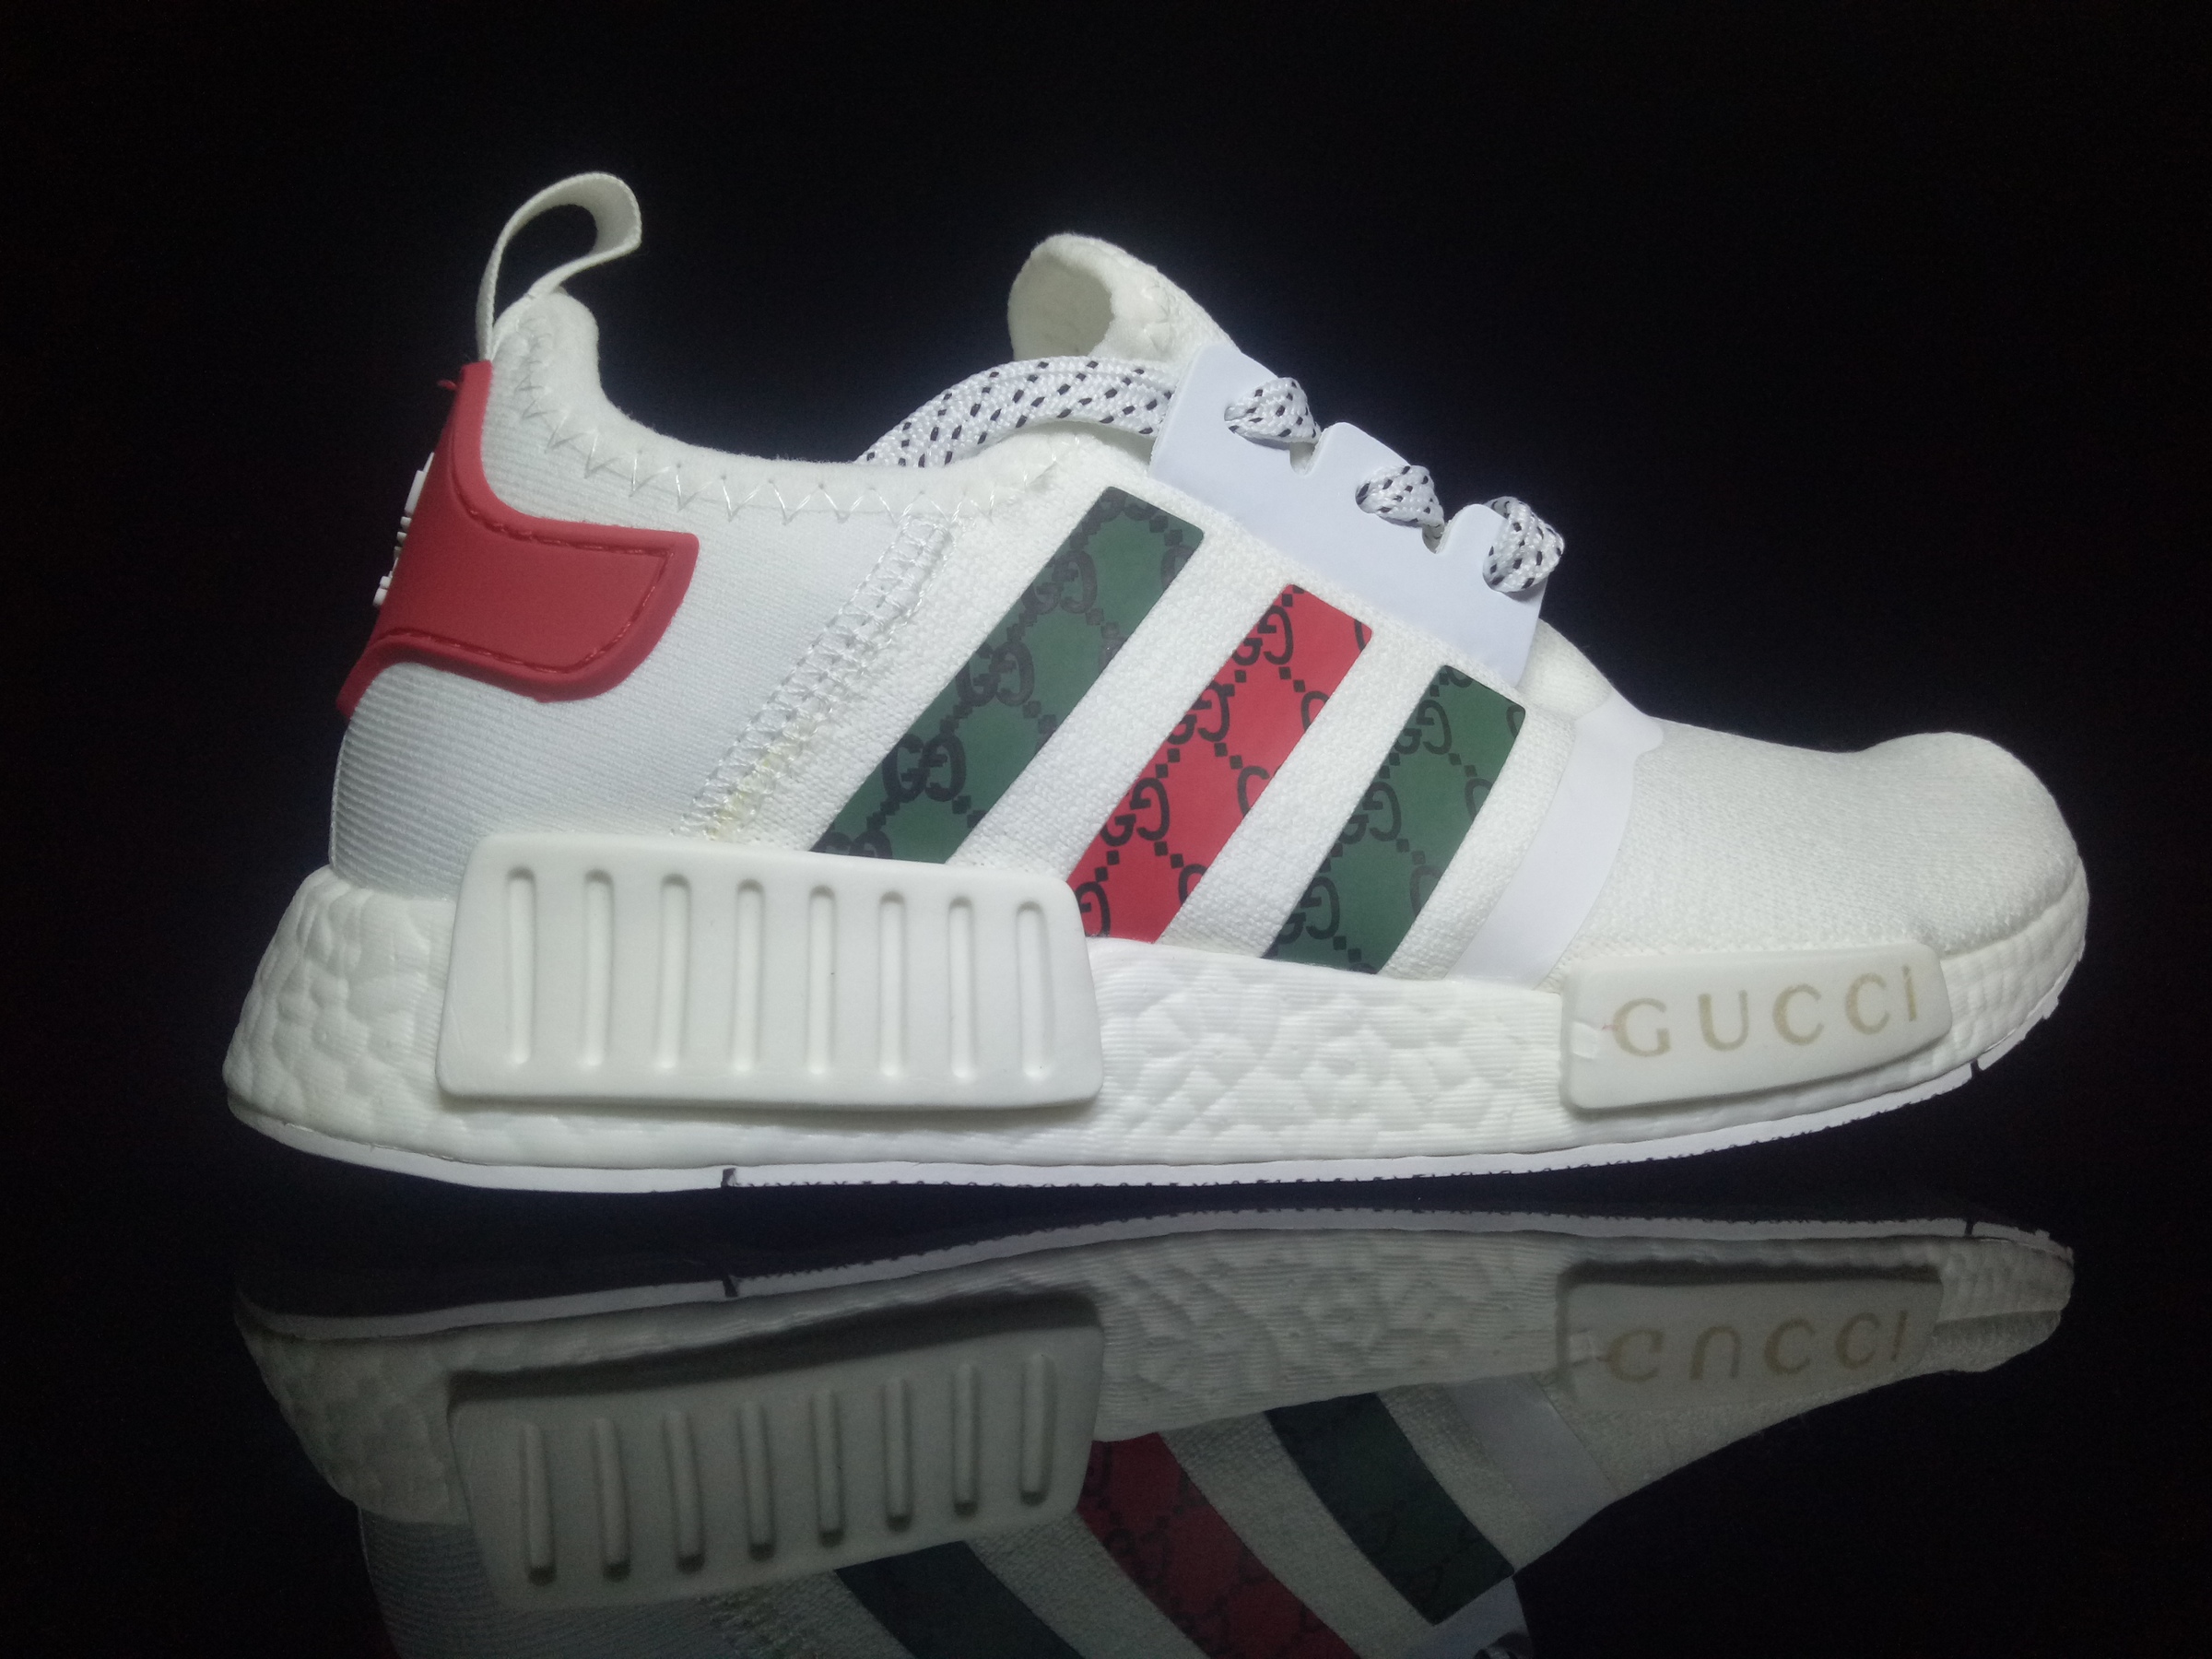 Gucci x Adidas NMD Knit White – Sally House of Fashion | Buy Your